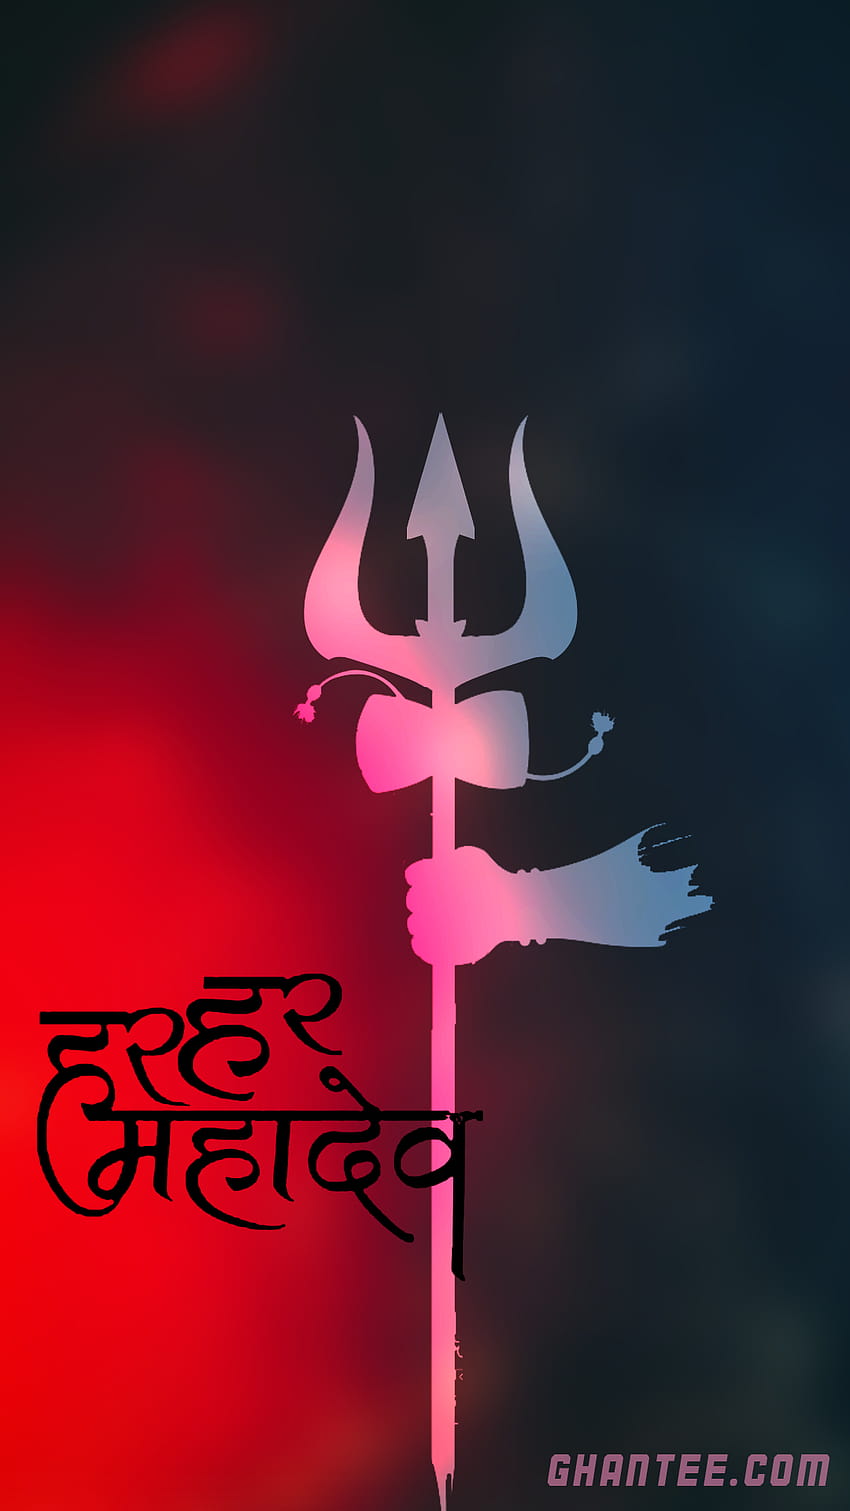 2 best lord shiva for mobile devices, mahakal black HD phone ...